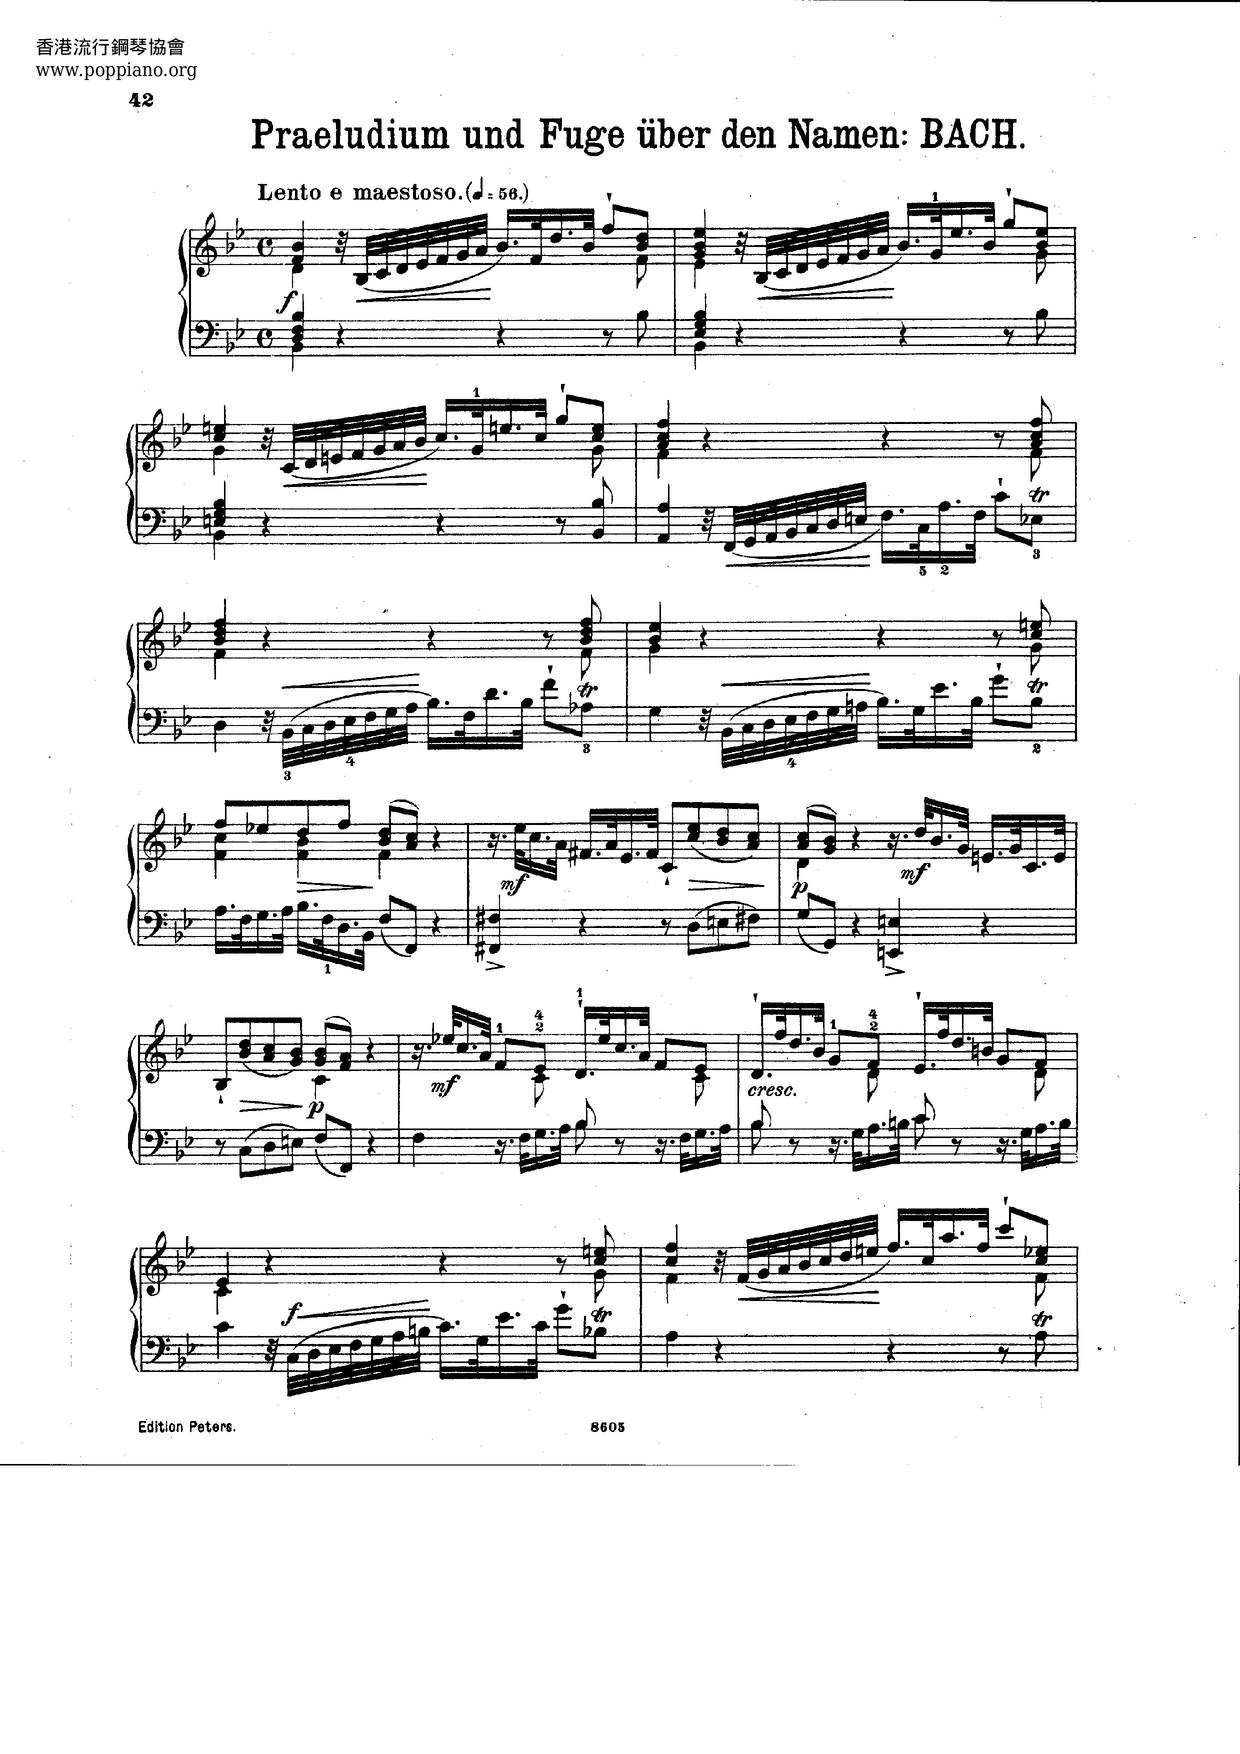 Prelude And Fugue On 'B-A-C-H', BWV 898 Score